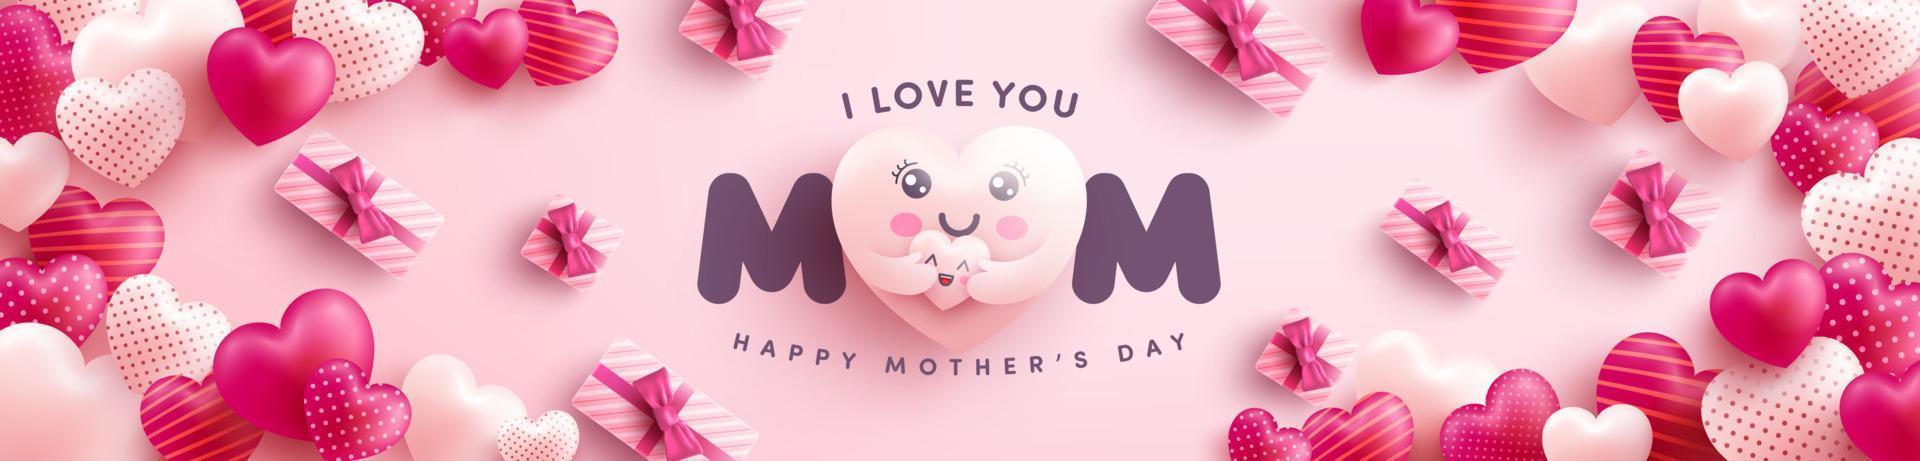 Mother's Day banner with Moter heart emoji hugging baby heart and gift box on pink background.Promotion and shopping template or background for Love and Mother's day concept.Vector illustration eps 10 vector